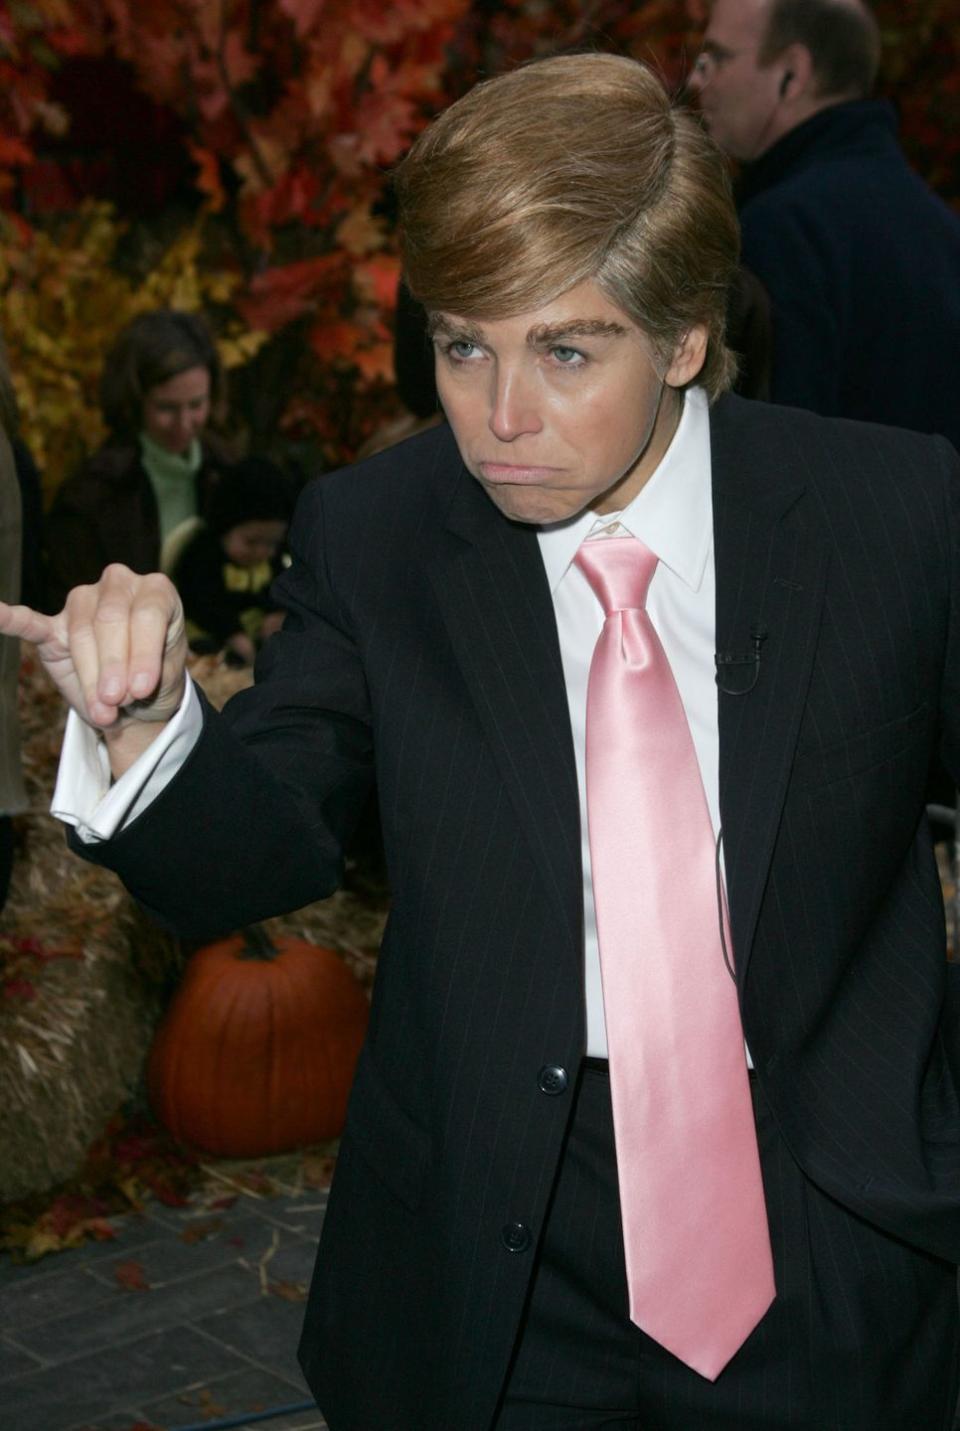 <p>Way before anyone could imagine Donald Trump becoming president, Katie dressed up as the former reality TV star. <em>The Apprentice</em> had just been released that year on NBC, making her costume choice especially topical.</p>